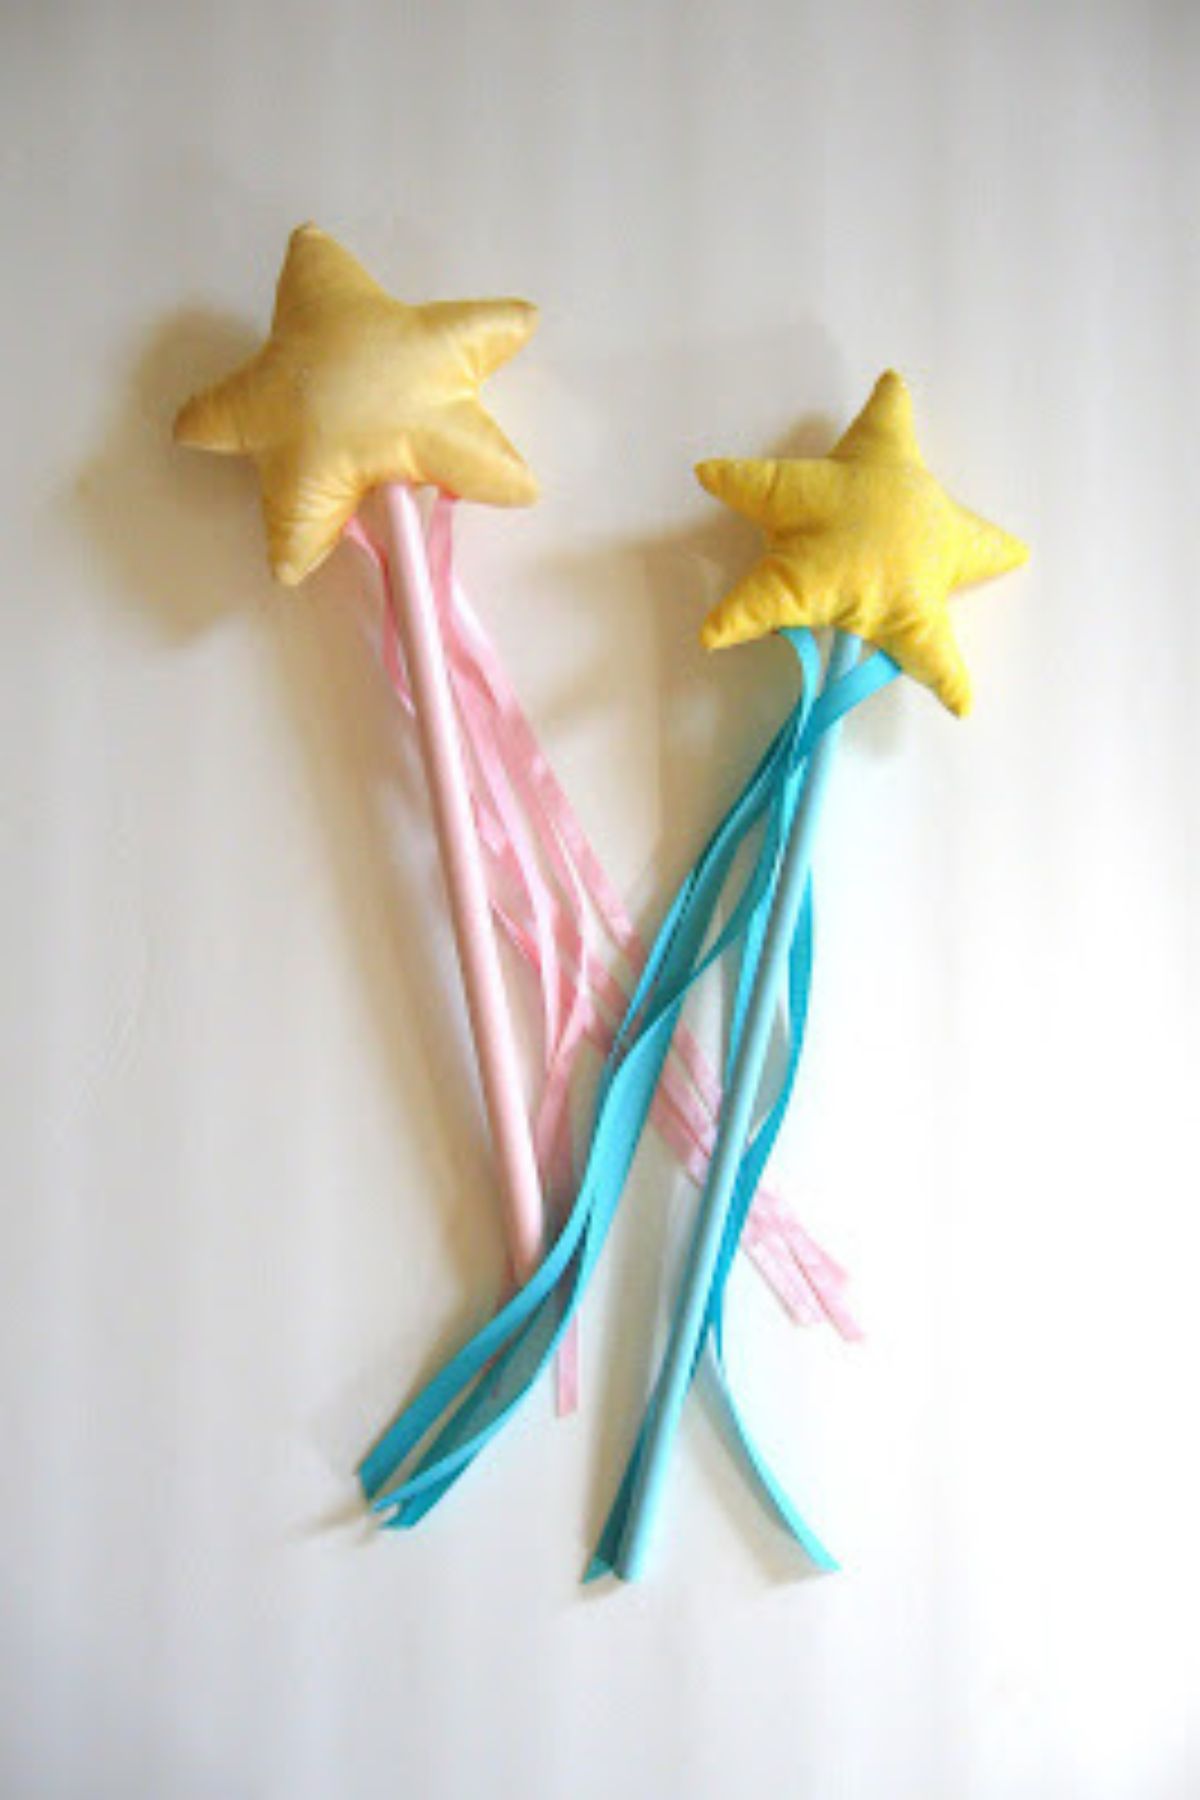 Two homemade fairy wants, one pink and one blue with yellow padded stars on top.